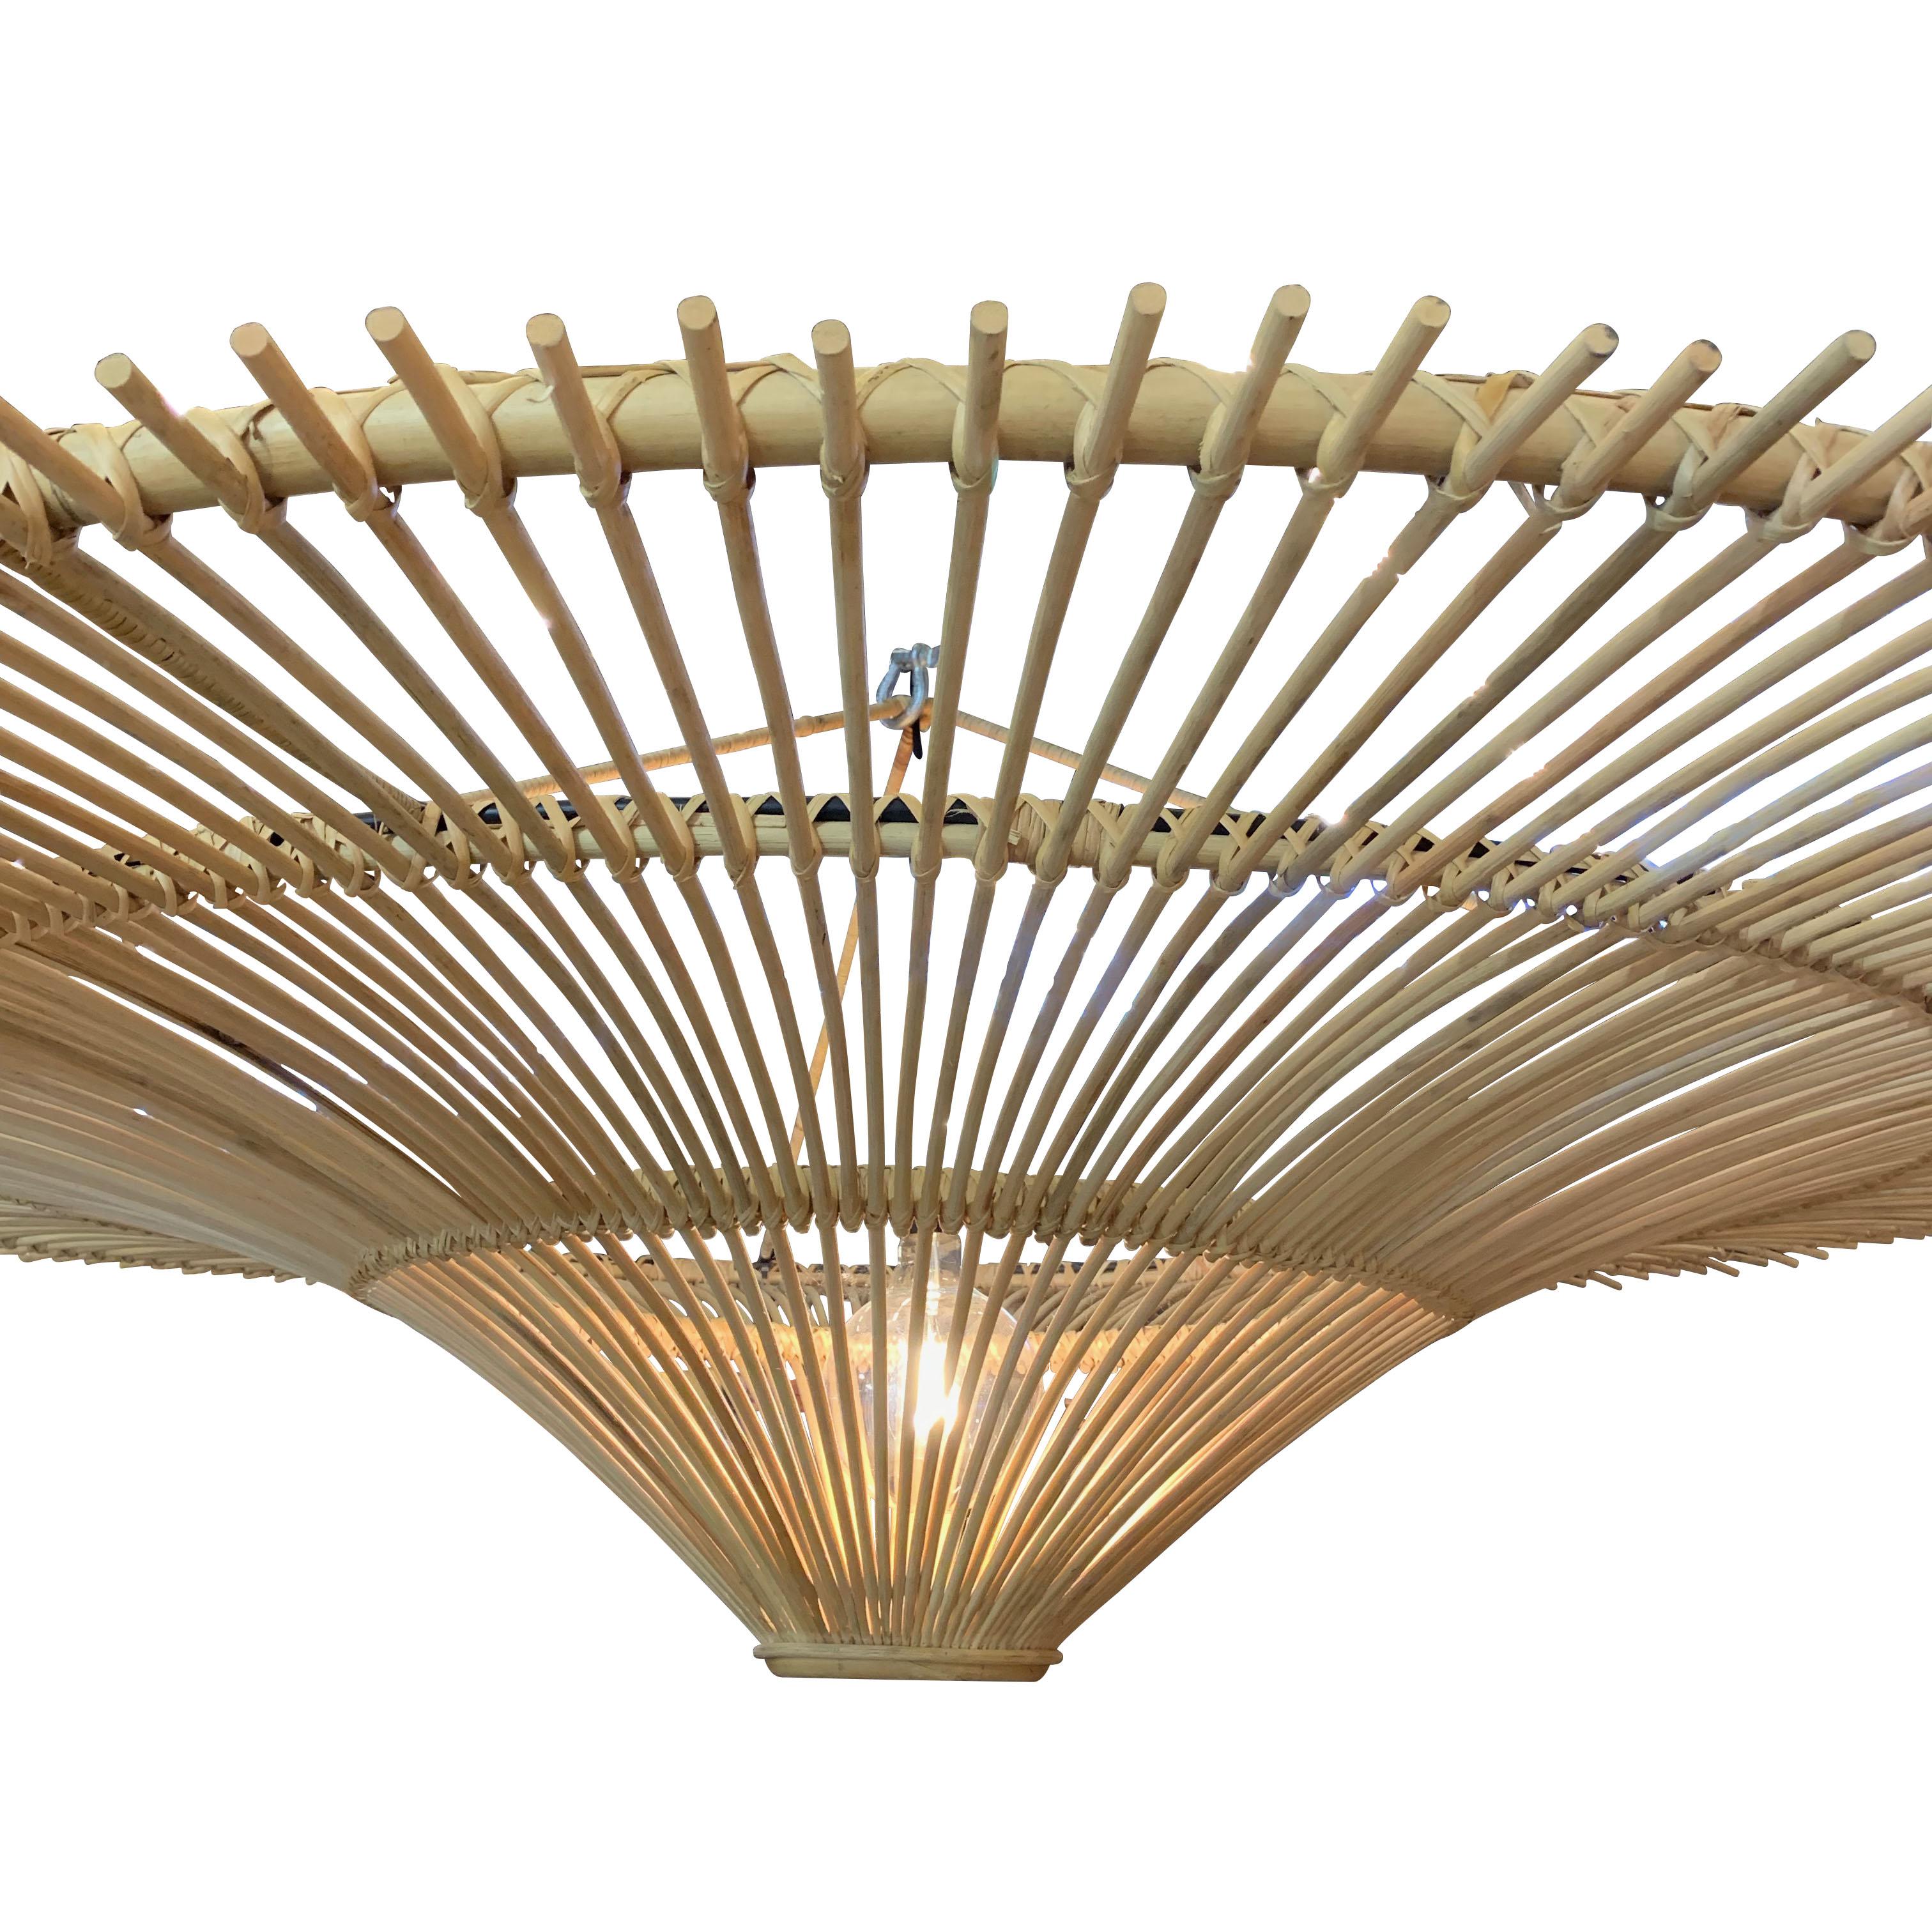 Contemporary Indonesian extra large round umbrella shaped chandelier made of bamboo.
Single bulb.
60 watt to 150 watt maximum.

Also available in two additional sizes
Measures : L976 32